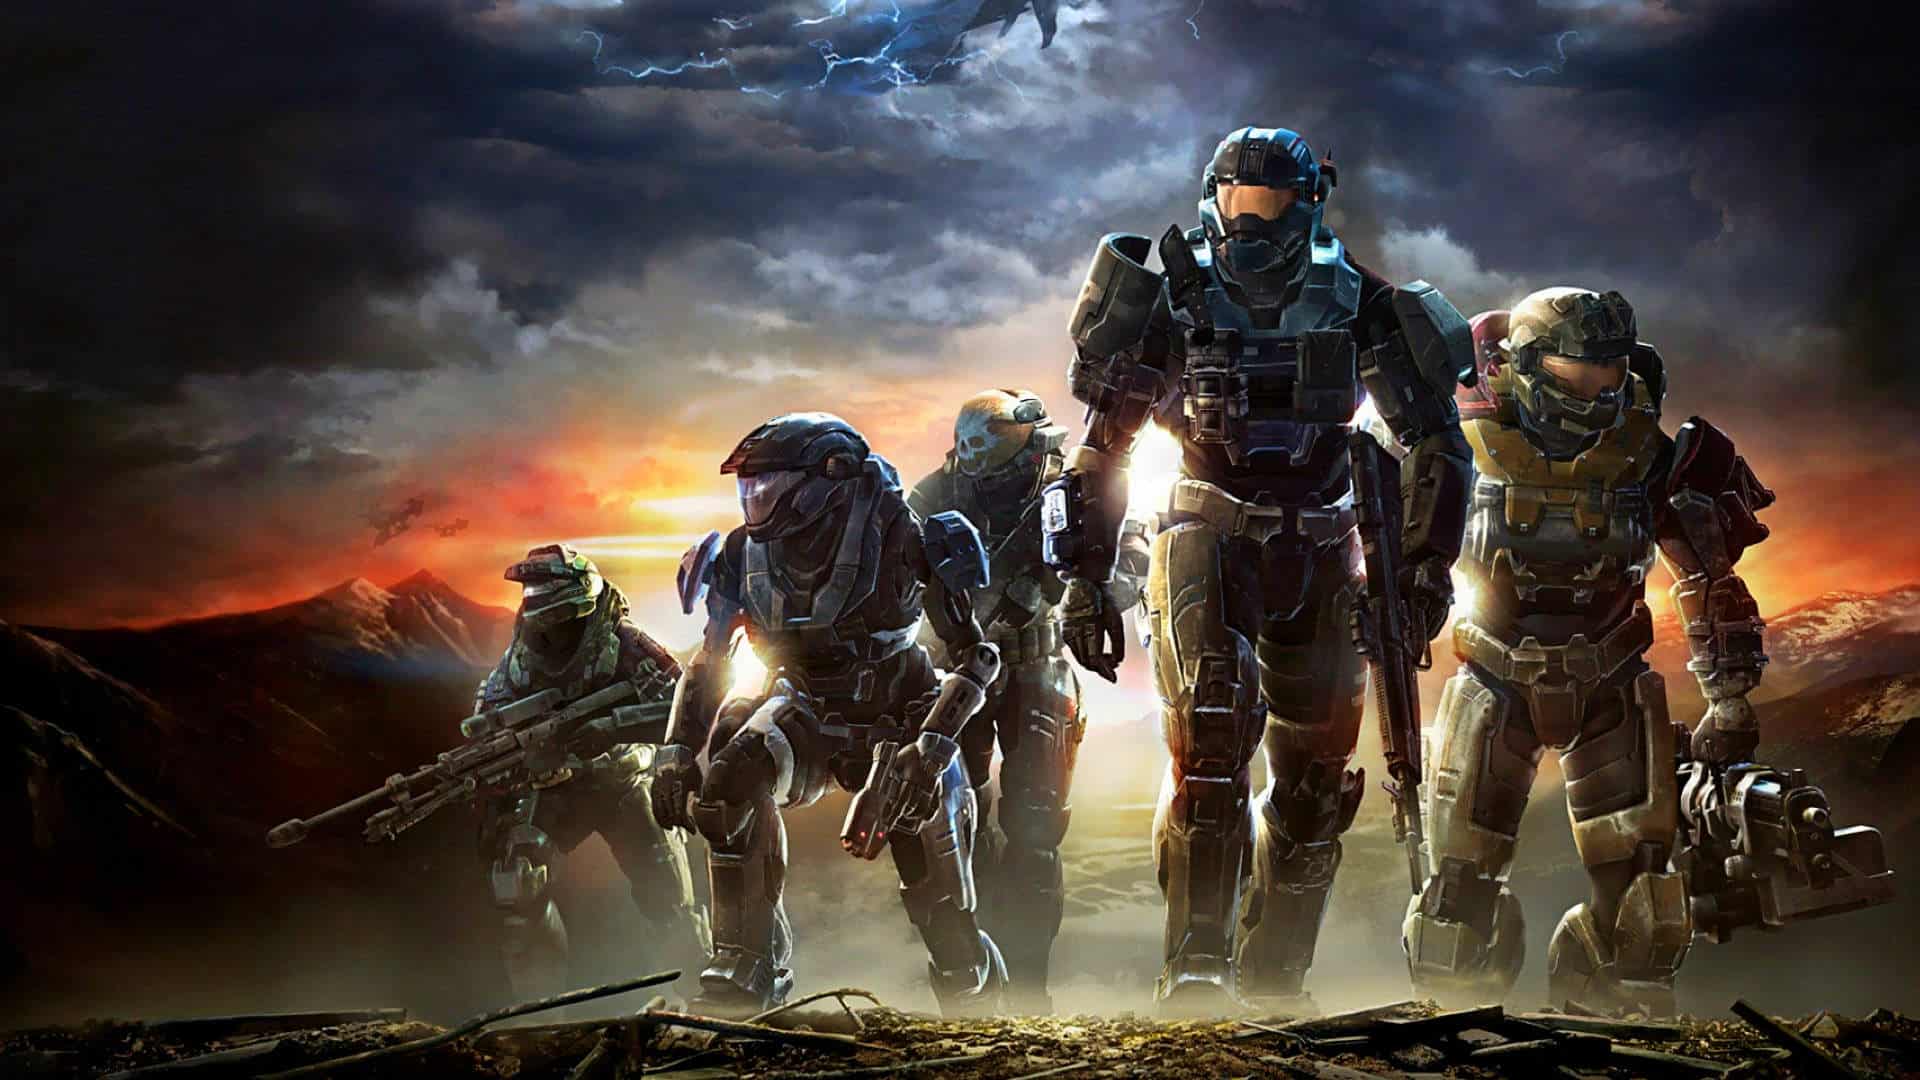 Halo: The Master Chief Collection Gets New Update On July 20